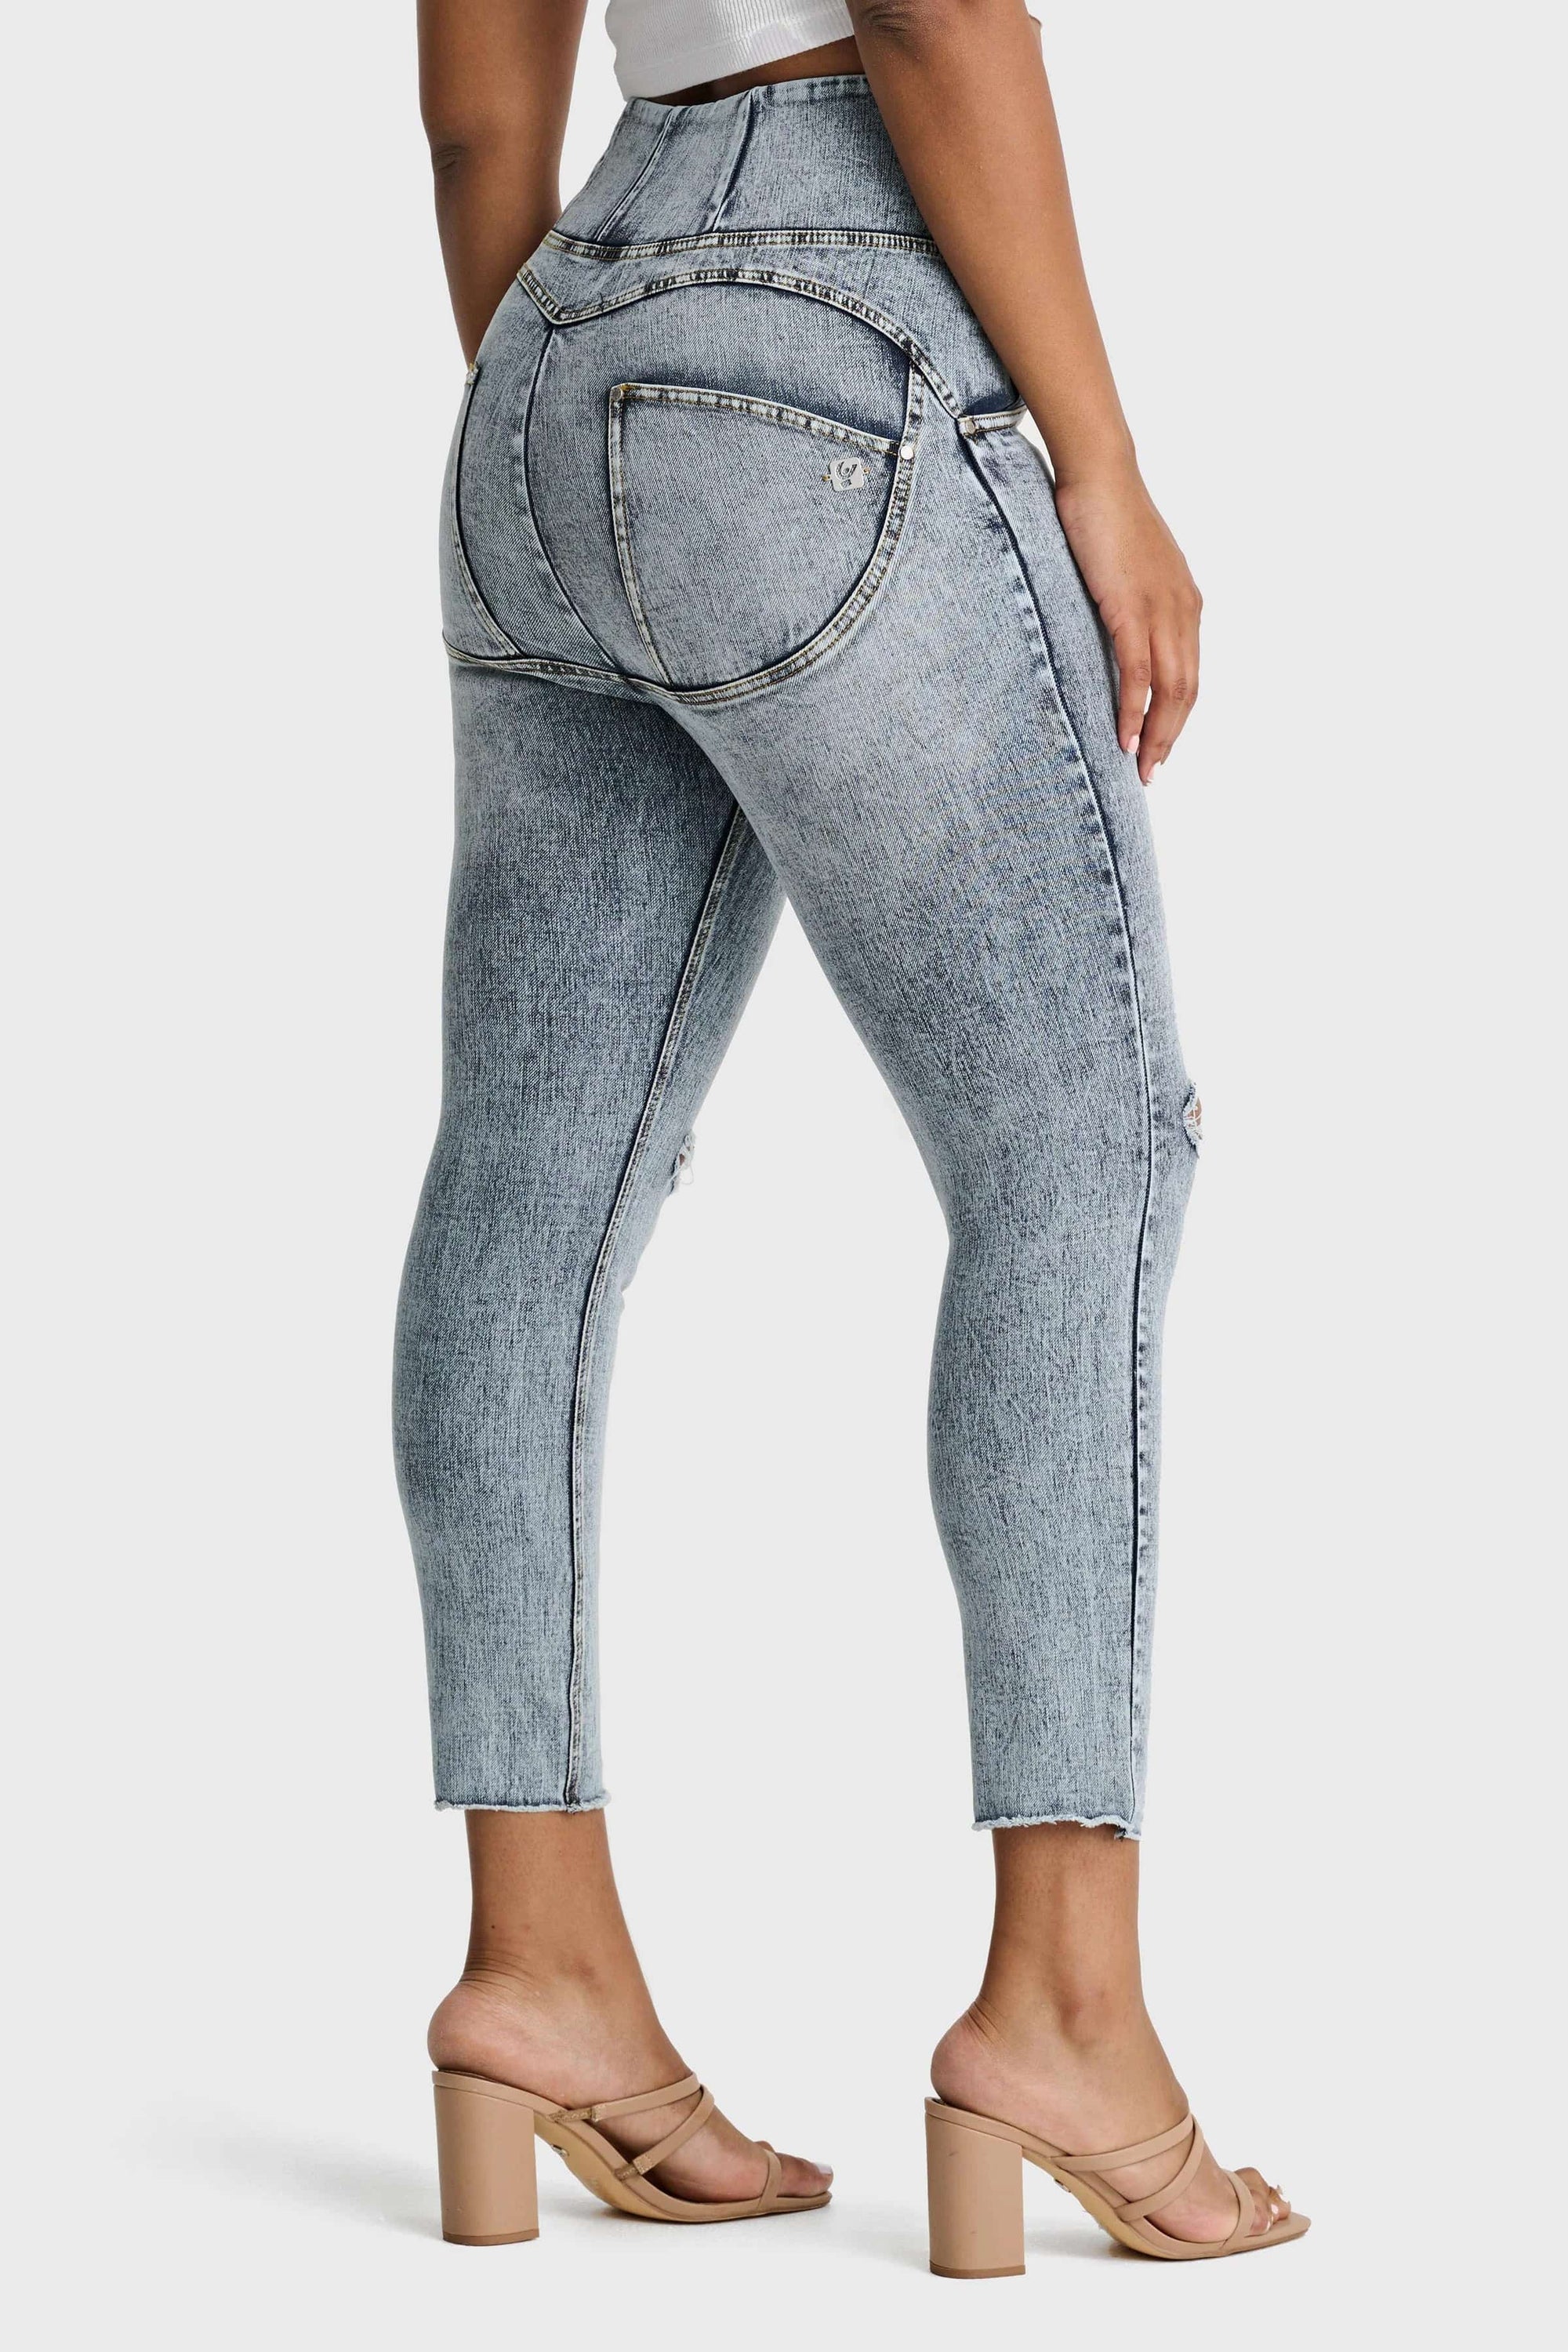 WR.UP® Snug Curvy Ripped Jeans - High Waisted - 7/8 Length - Blue Stonewash + Yellow Stitching 3